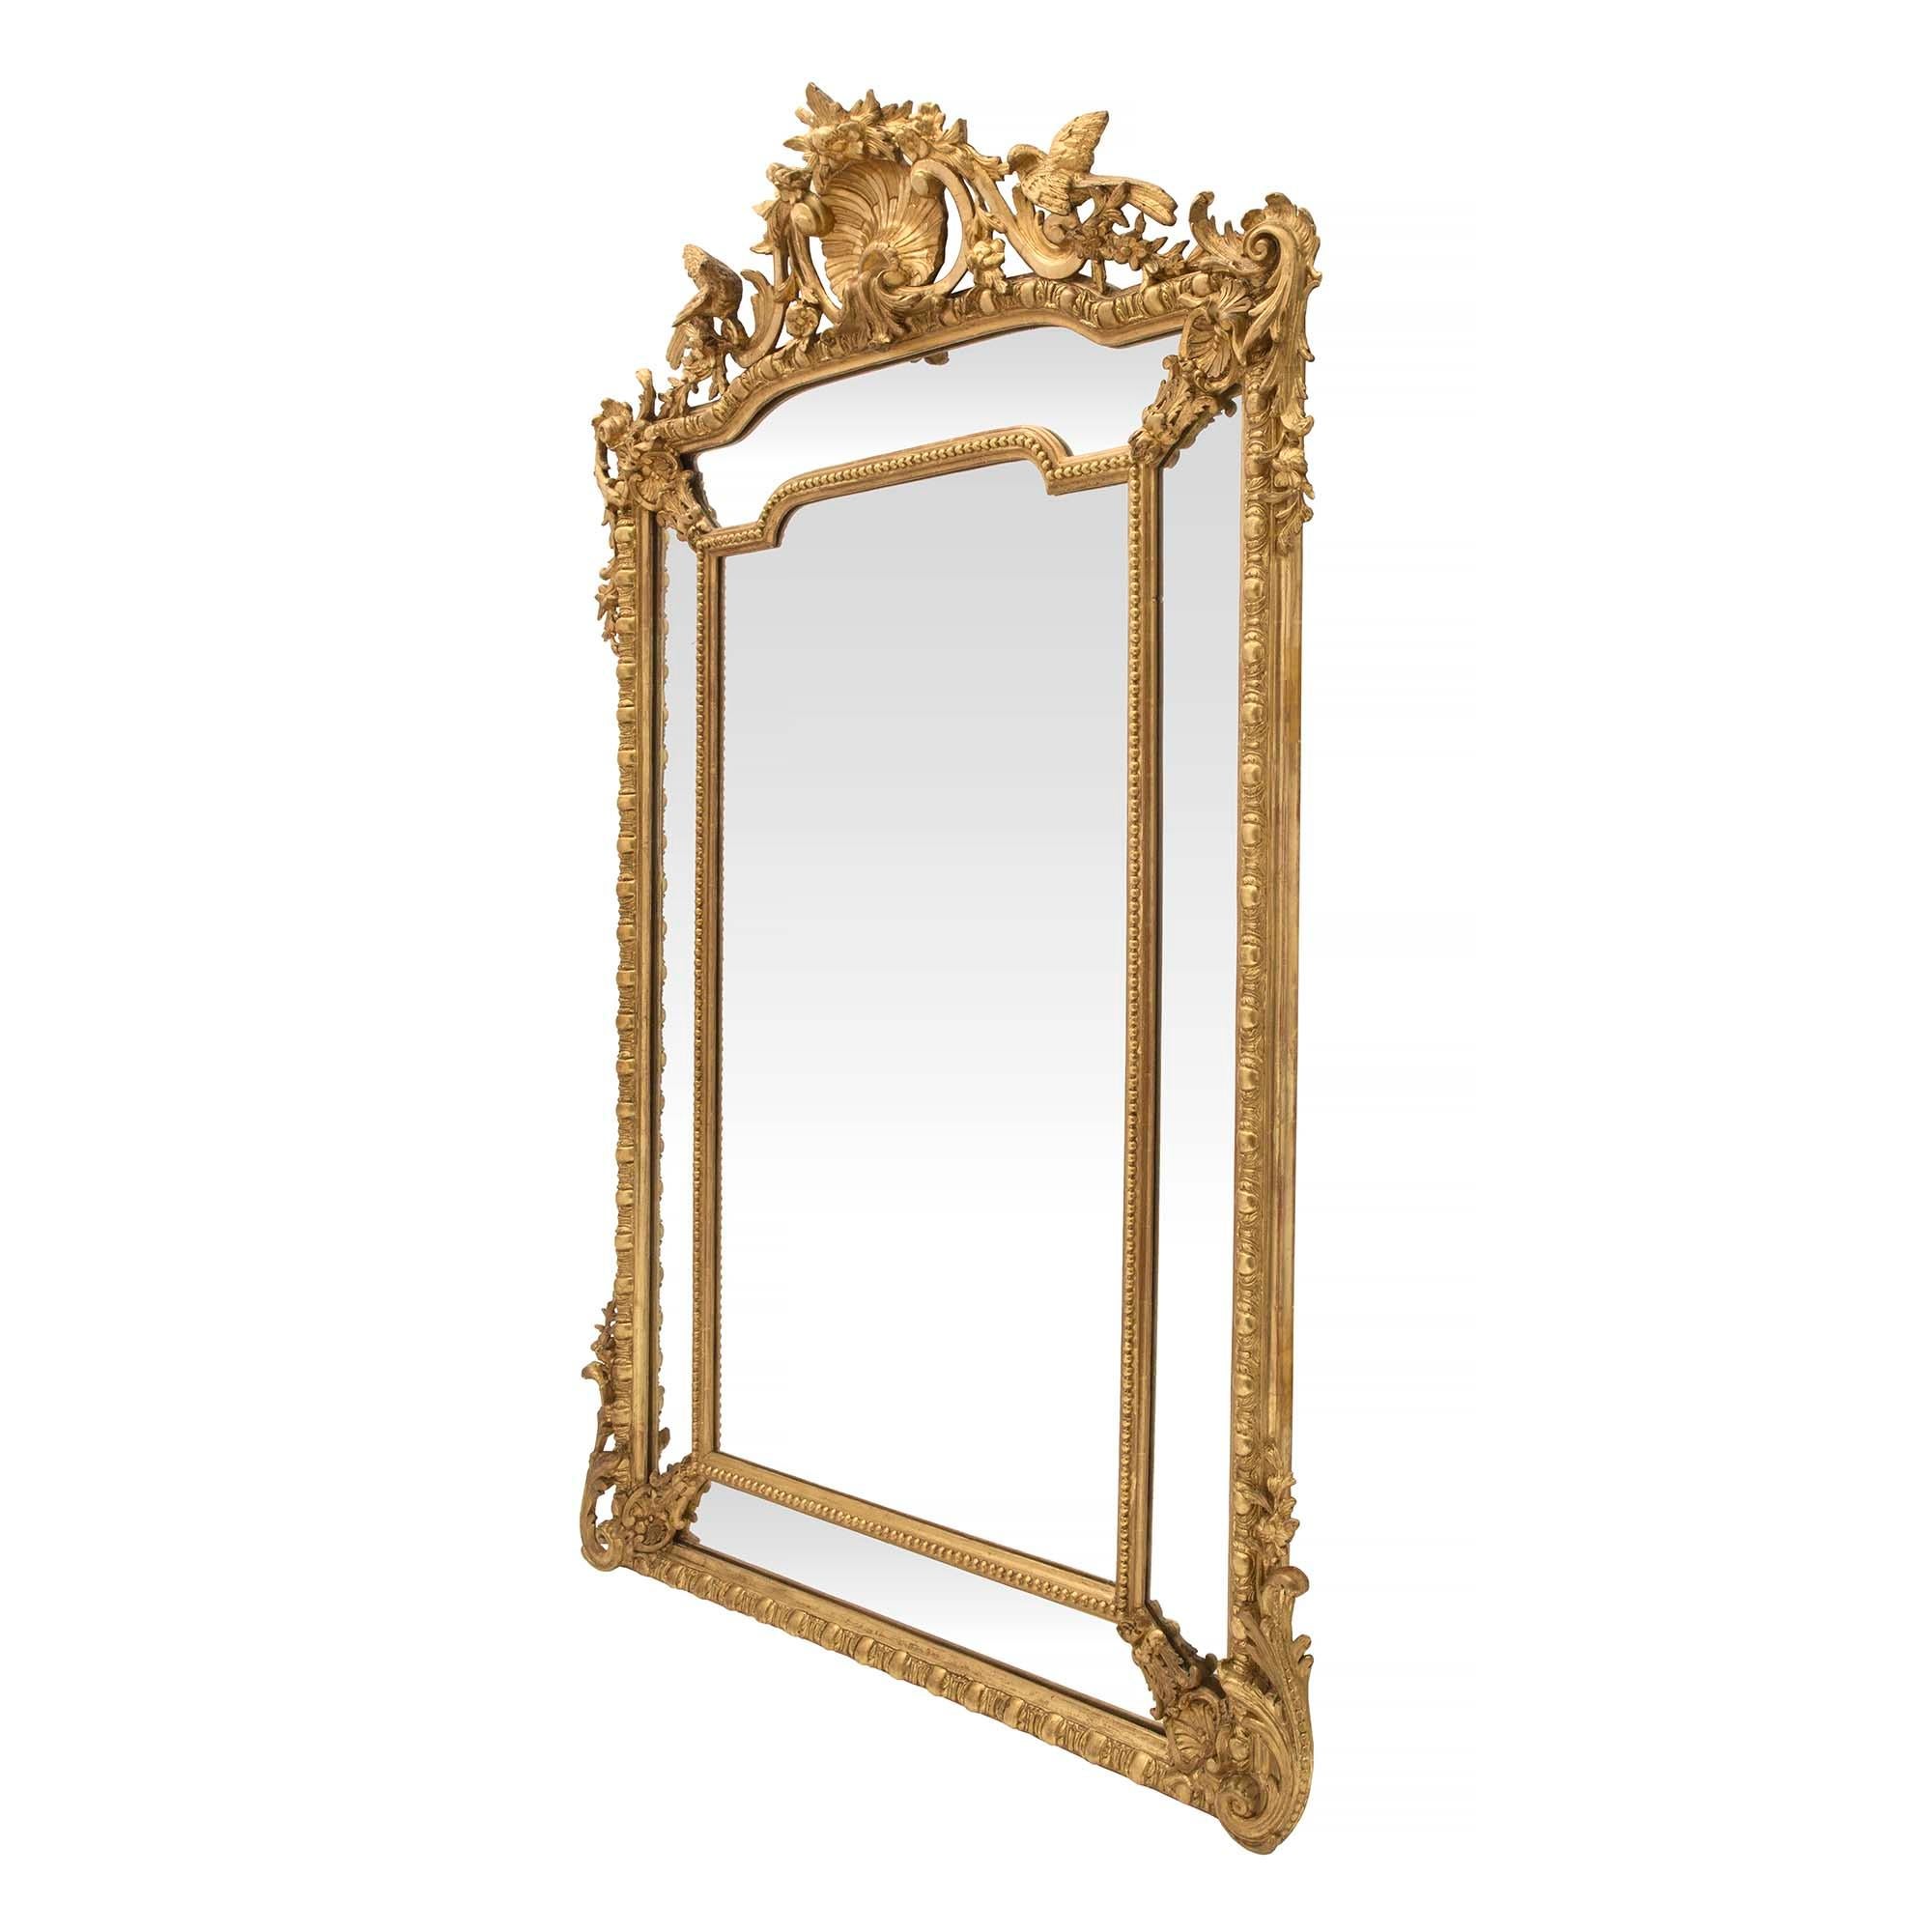 A stunning French 19th century Louis XVI st. double framed giltwood mirror. The original central mirror plate is framed within a beaded giltwood frame. The original outer mirror plates are framed by richly carved corner mounts amidst large elegant